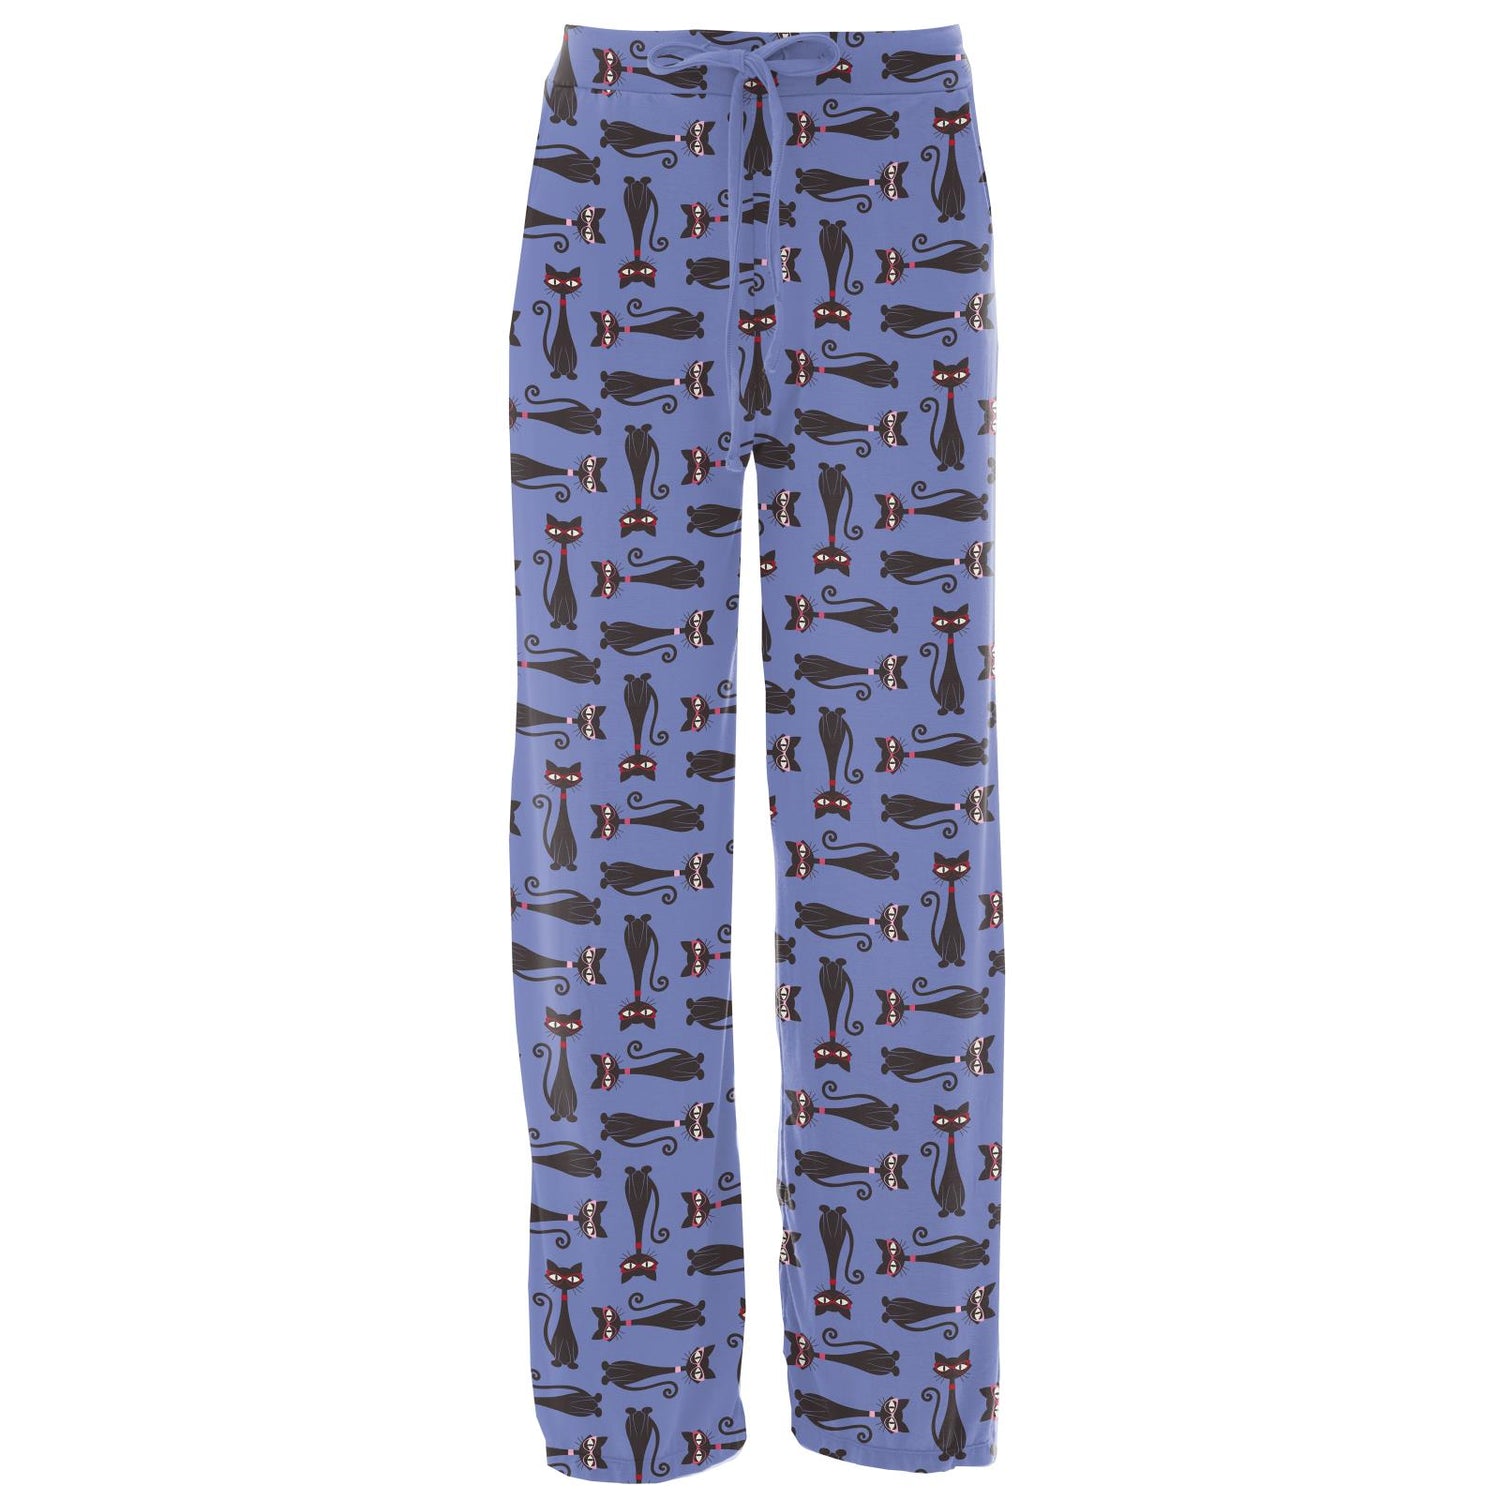 Women's Print Lounge Pants in Forget Me Not Cool Cats